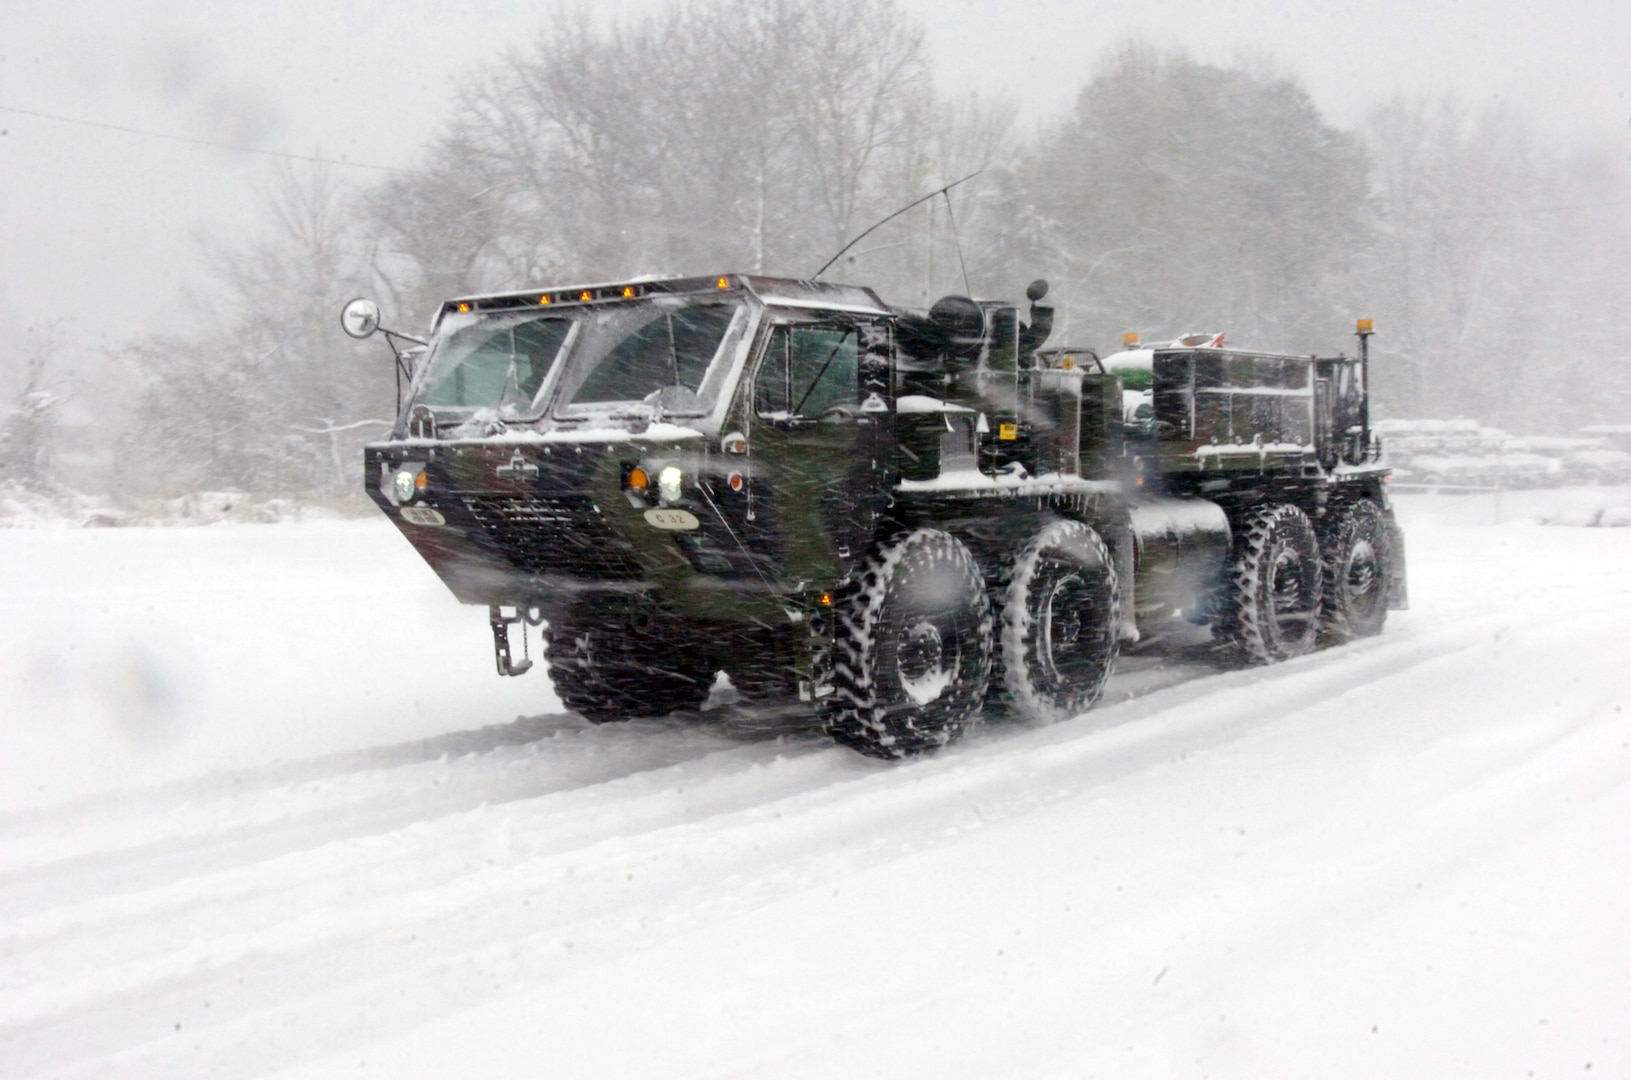 Approximately 100 Soldiers from the Virginia National Guard's 116th Brigade Combat Team were called to state active duty Dec. 25 in Norfolk, Va., in response to a severe snow storm which dropped a record amount of snow on the Hampton Roads area.